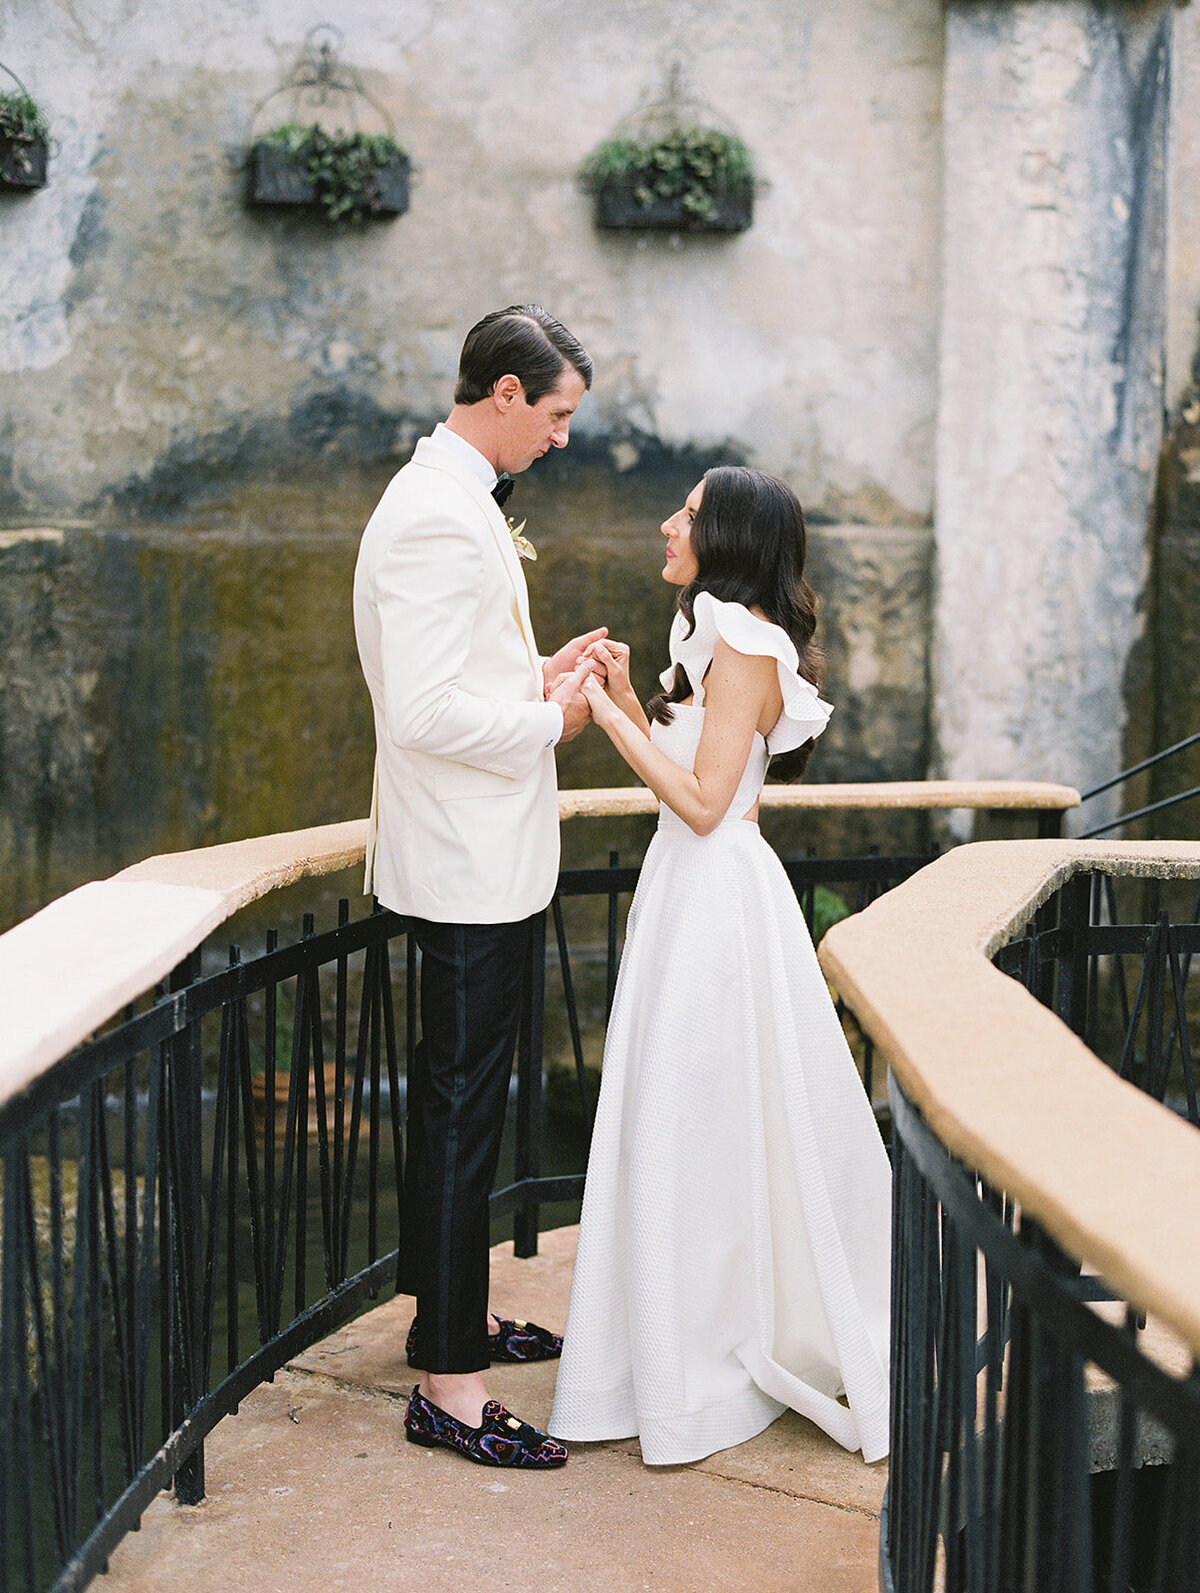 The bride and groom share a private moment before the reception next to the waterfall at Villa Antonia